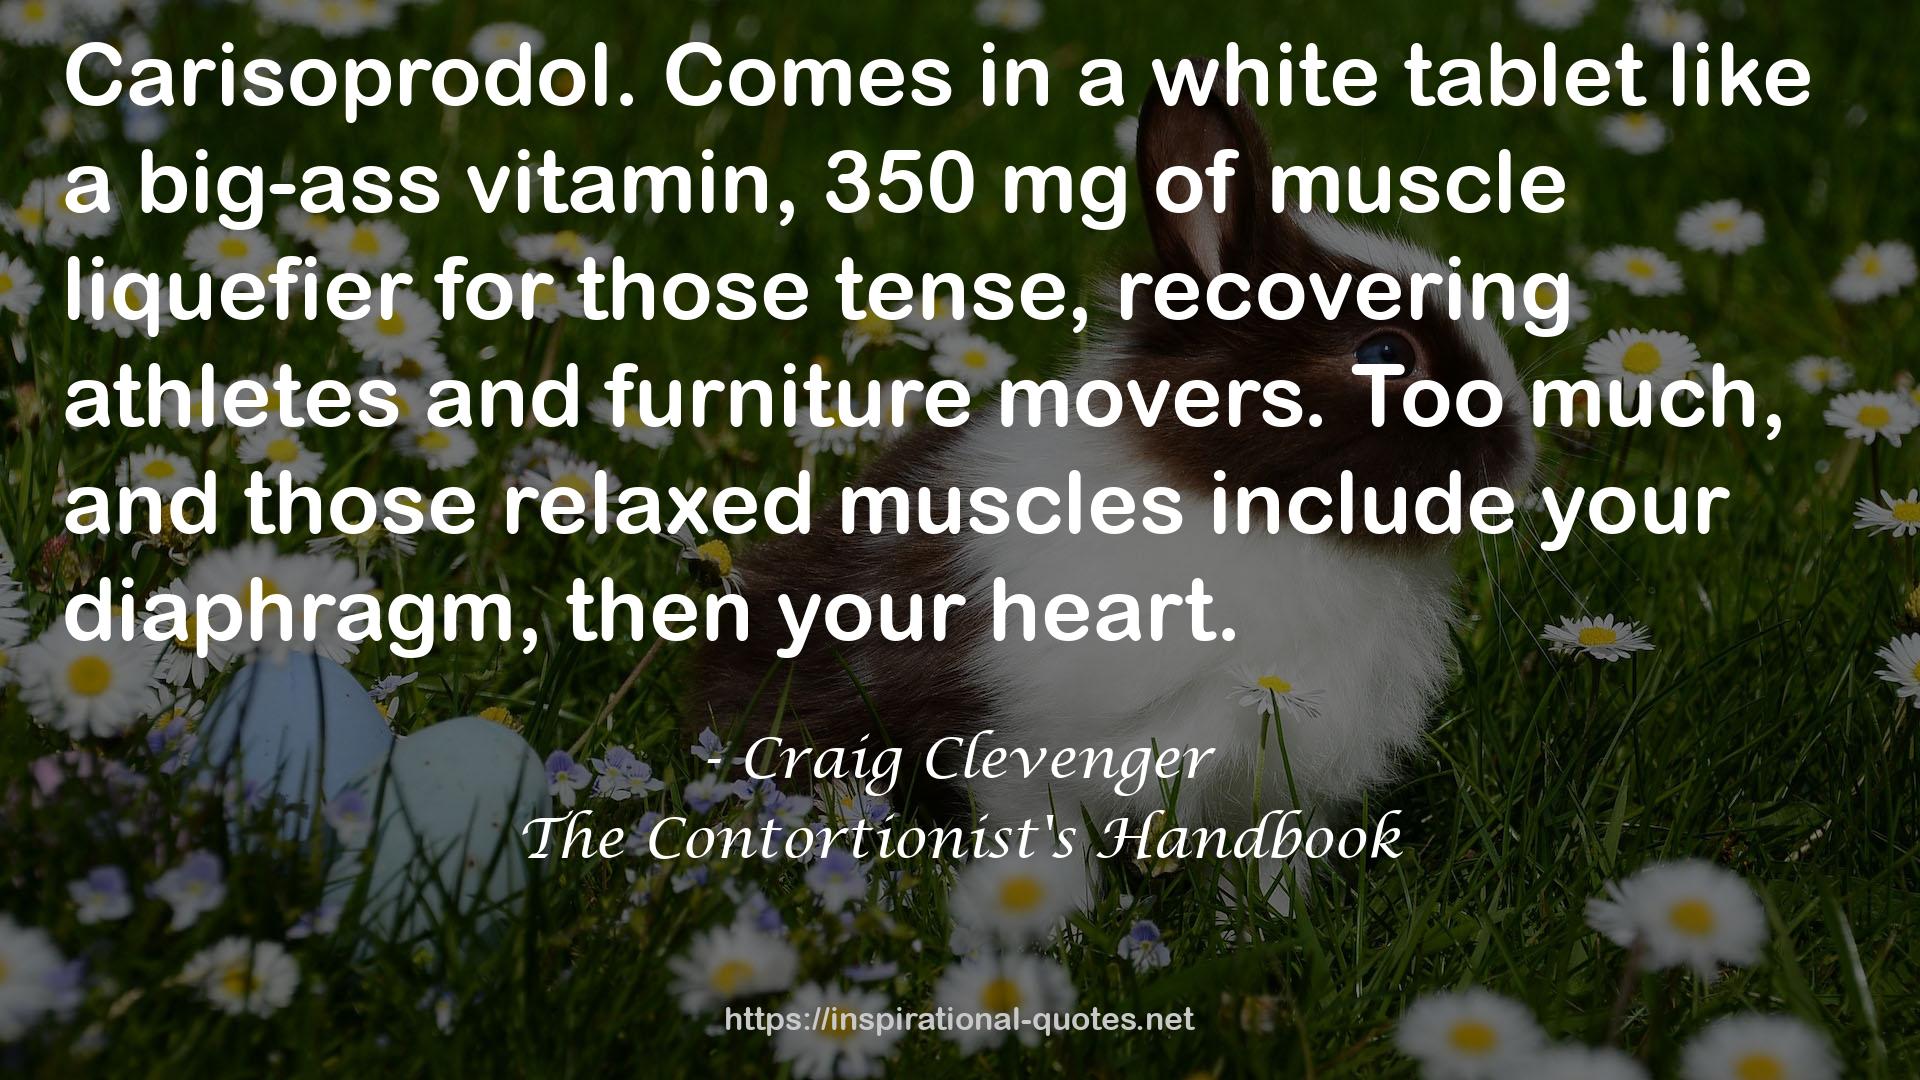 The Contortionist's Handbook QUOTES